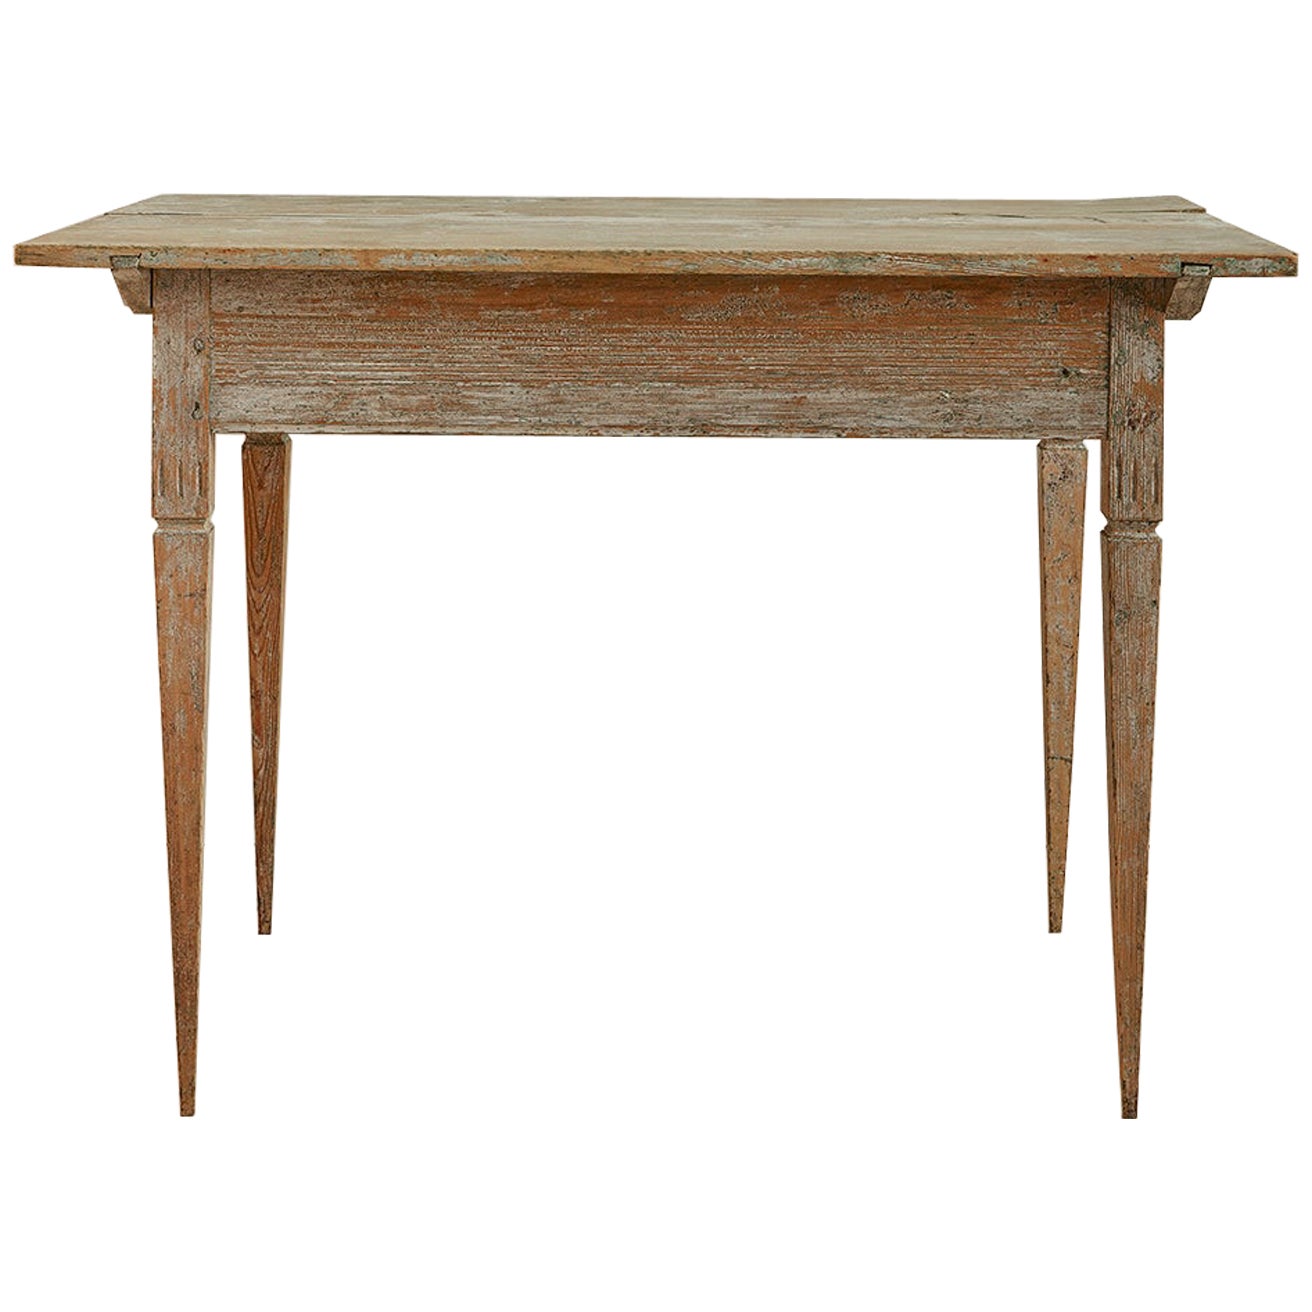 Antique Gustavian Pine Table, Sweden, Late 18th Century